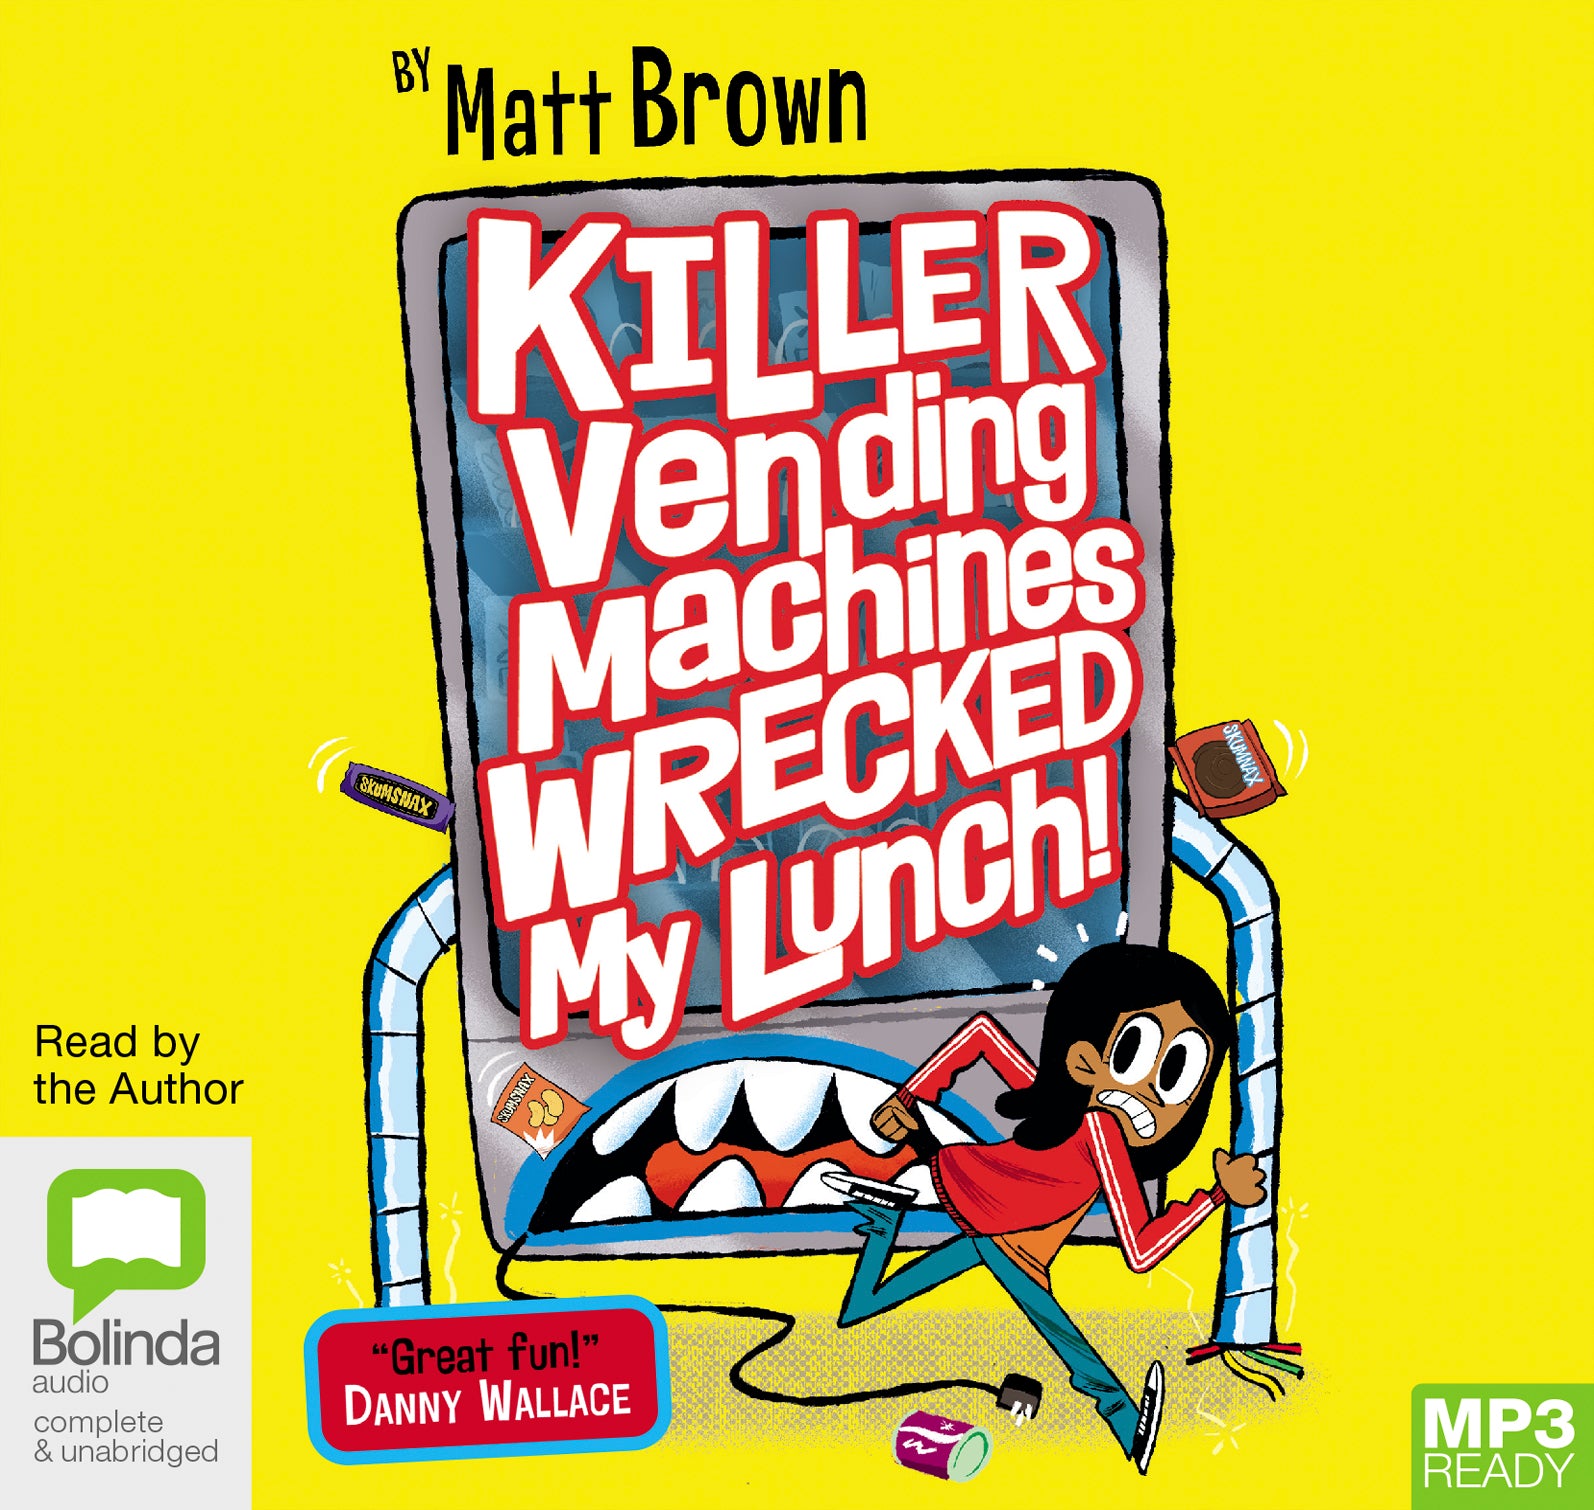 Killer Vending Machines Wrecked My Lunch  - Unbridged Audio Book on MP3